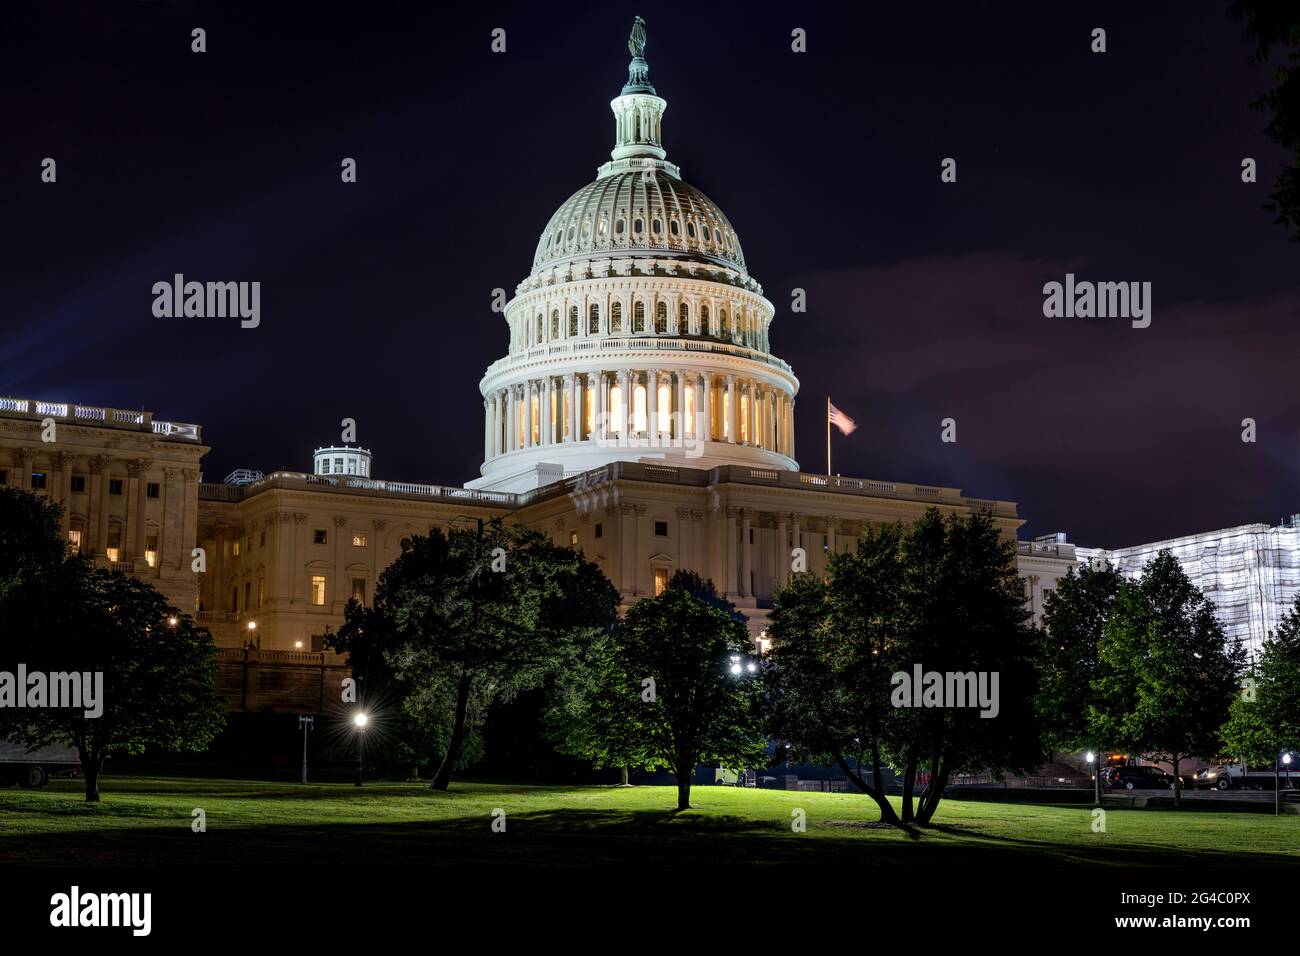 The Capitol at Night - A night view of west-side exterior of the U.S. Capitol Building. Washington, D.C., USA. Stock Photo